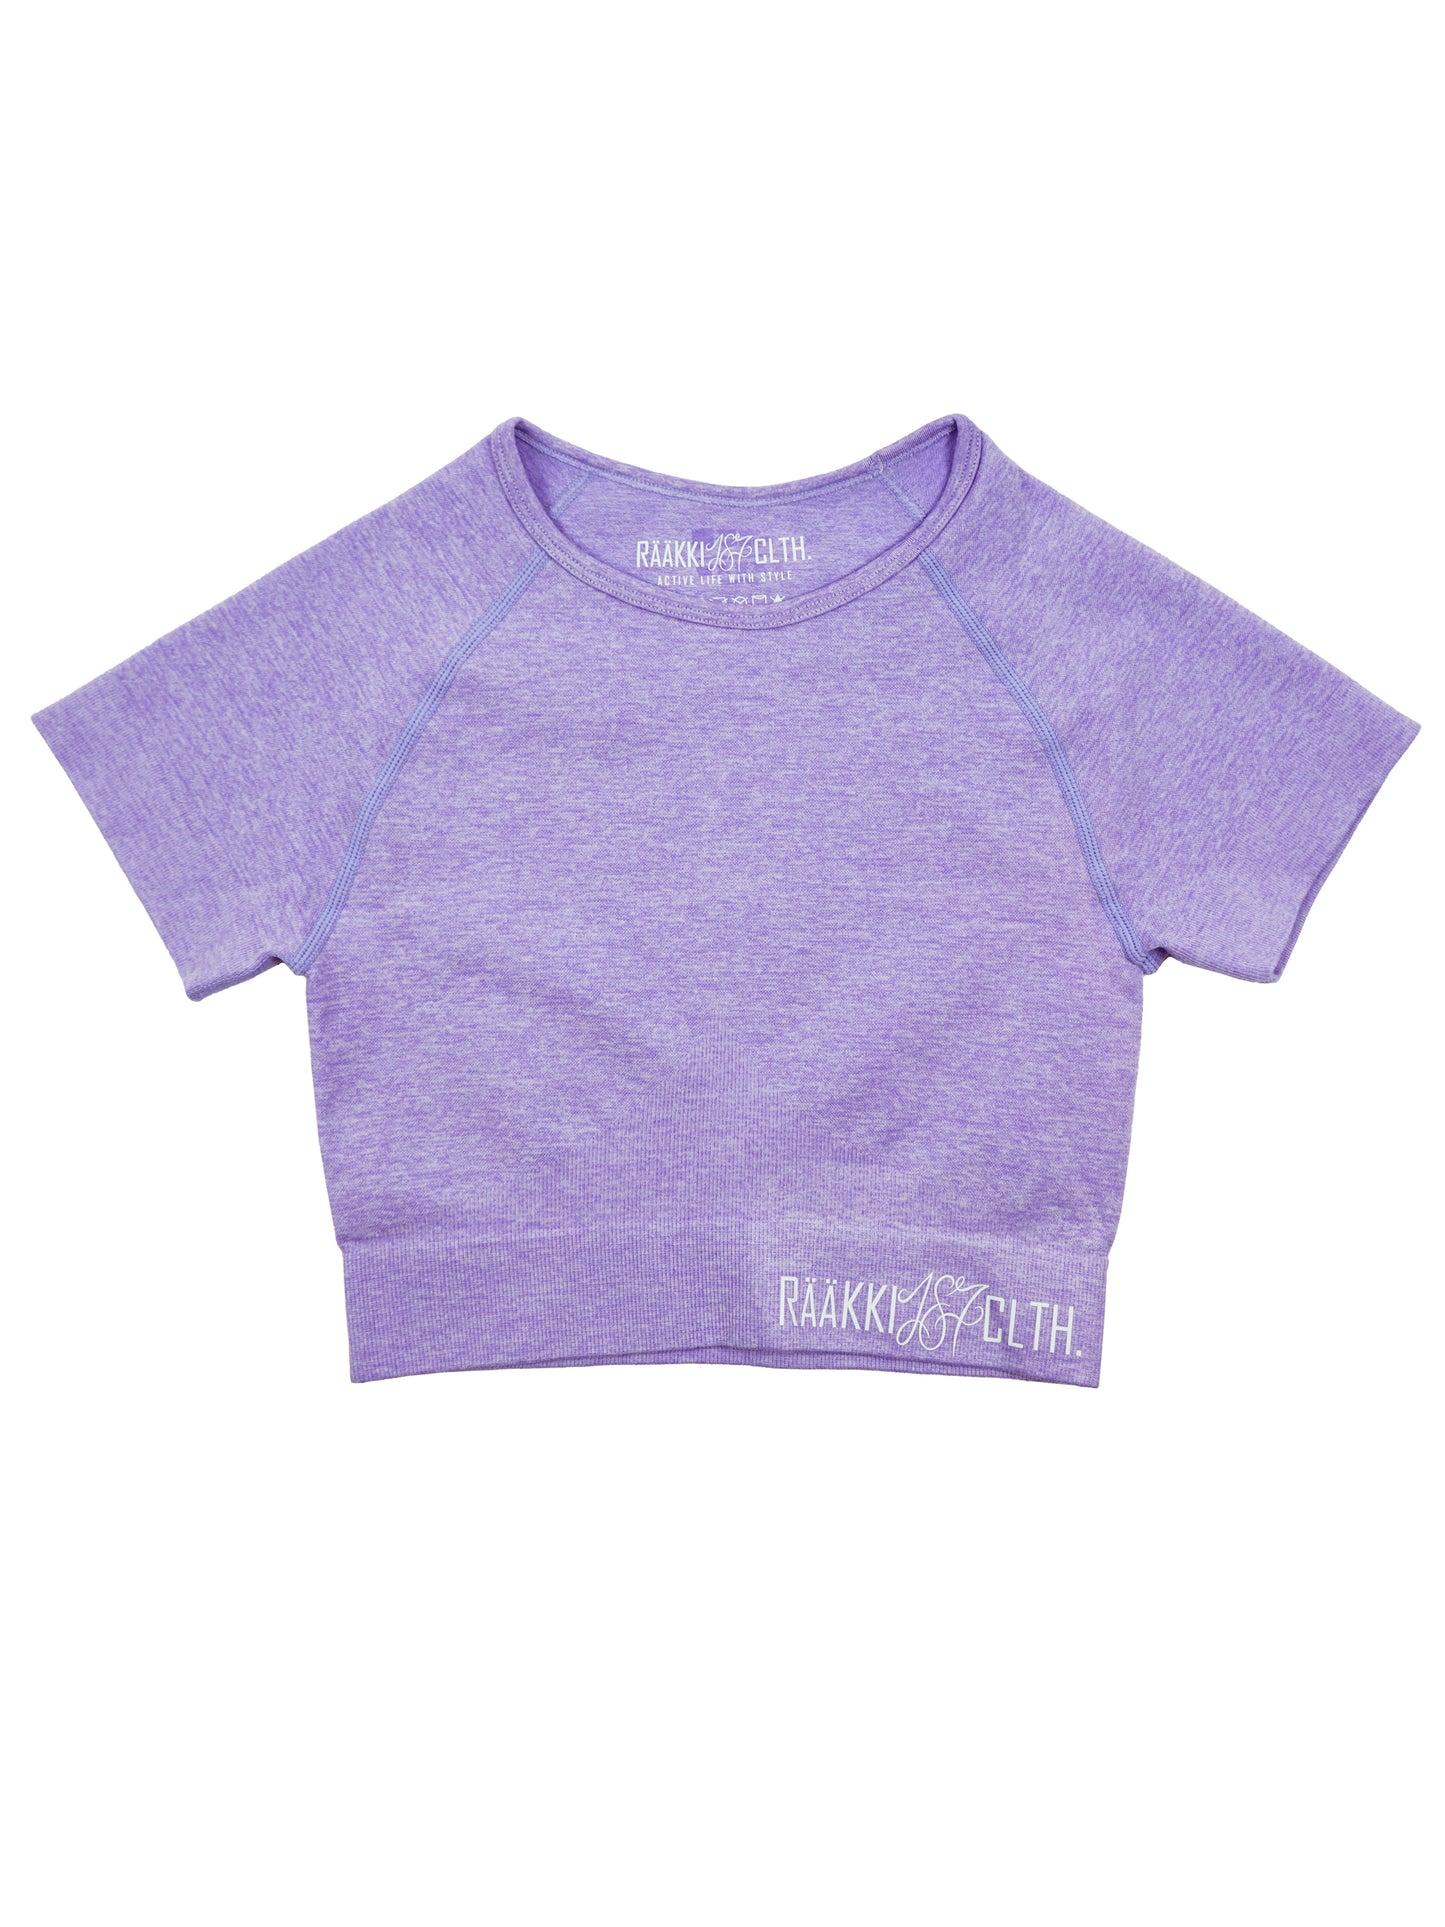 Simply Seamless Crop T - Candy Lavender